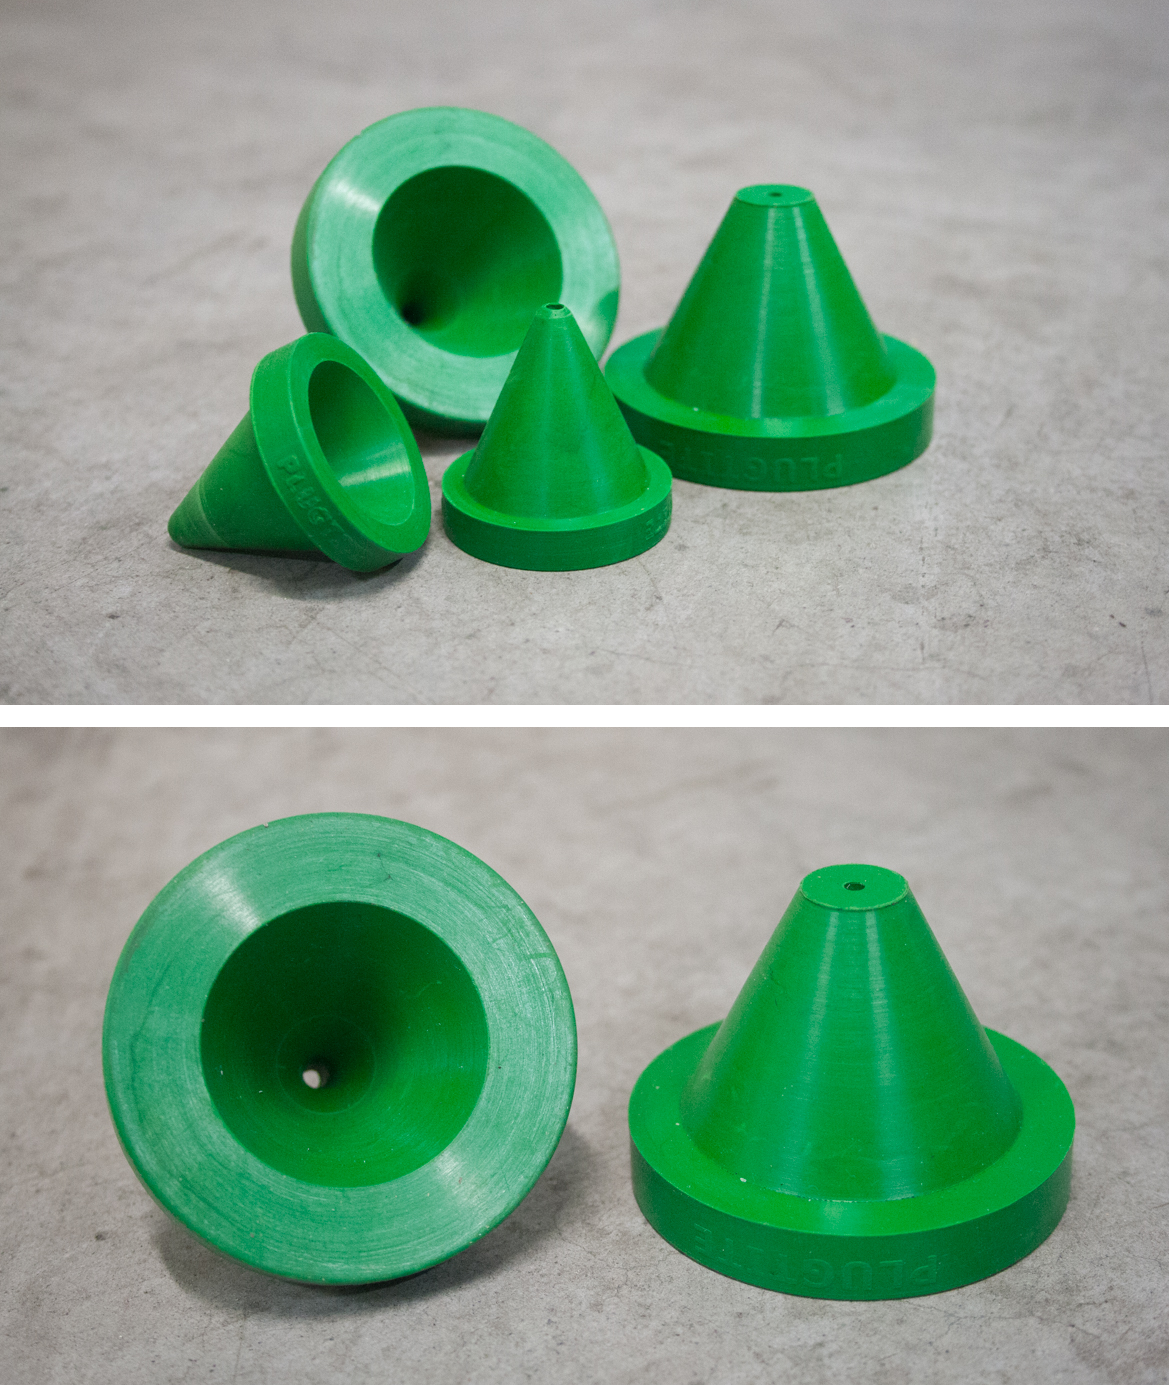 Plugtite - Nozzle adaptor for use with air-gun